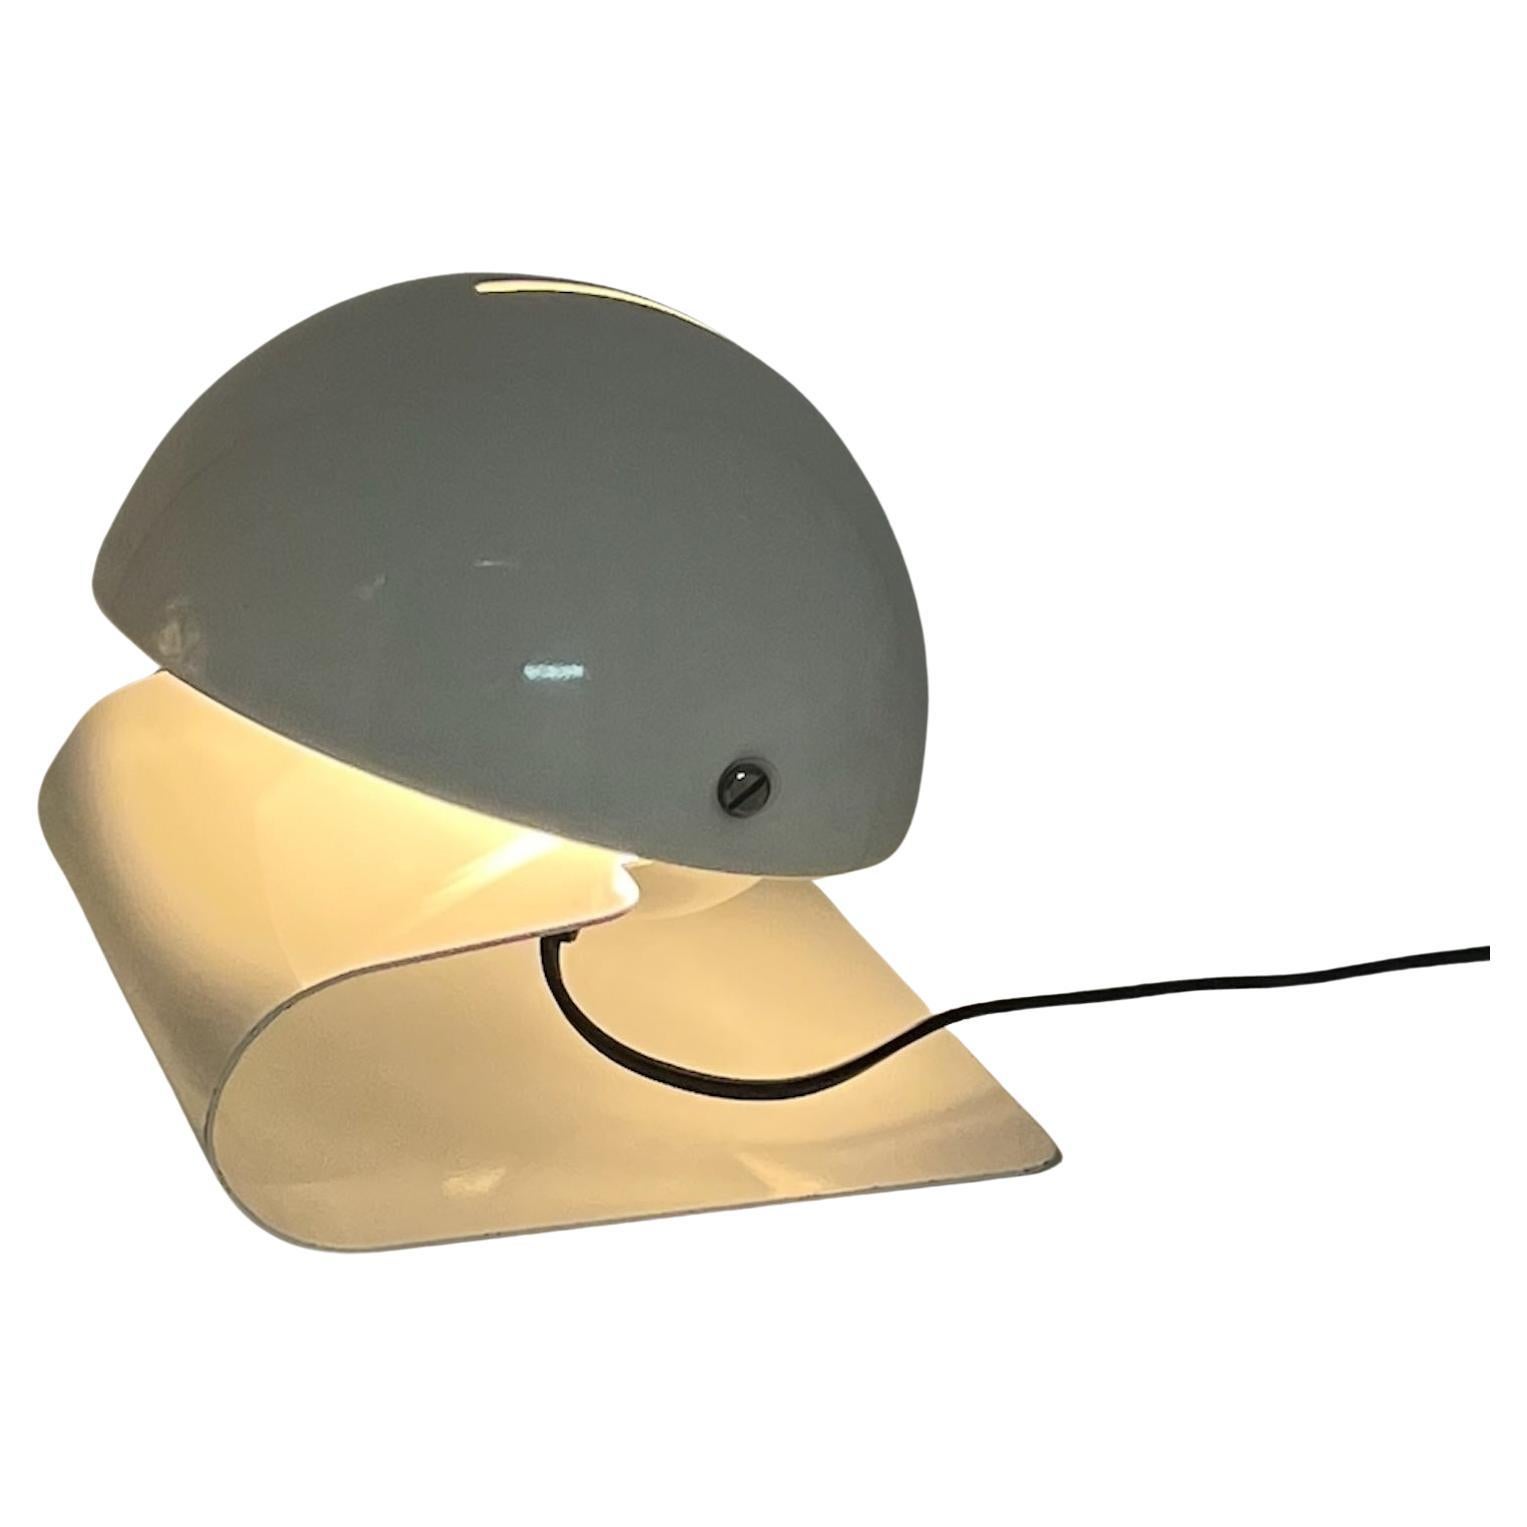 Iconic table lamp ‘Bugia’ designed by Giuseppe Cormio for Milano 1975 Fair and produced by Harvey Guzzini in 1976.

Bugia has a sleek, curved base made of a metal sheet with a tiltable half globe lampshade that allows to adjust the light. This piece